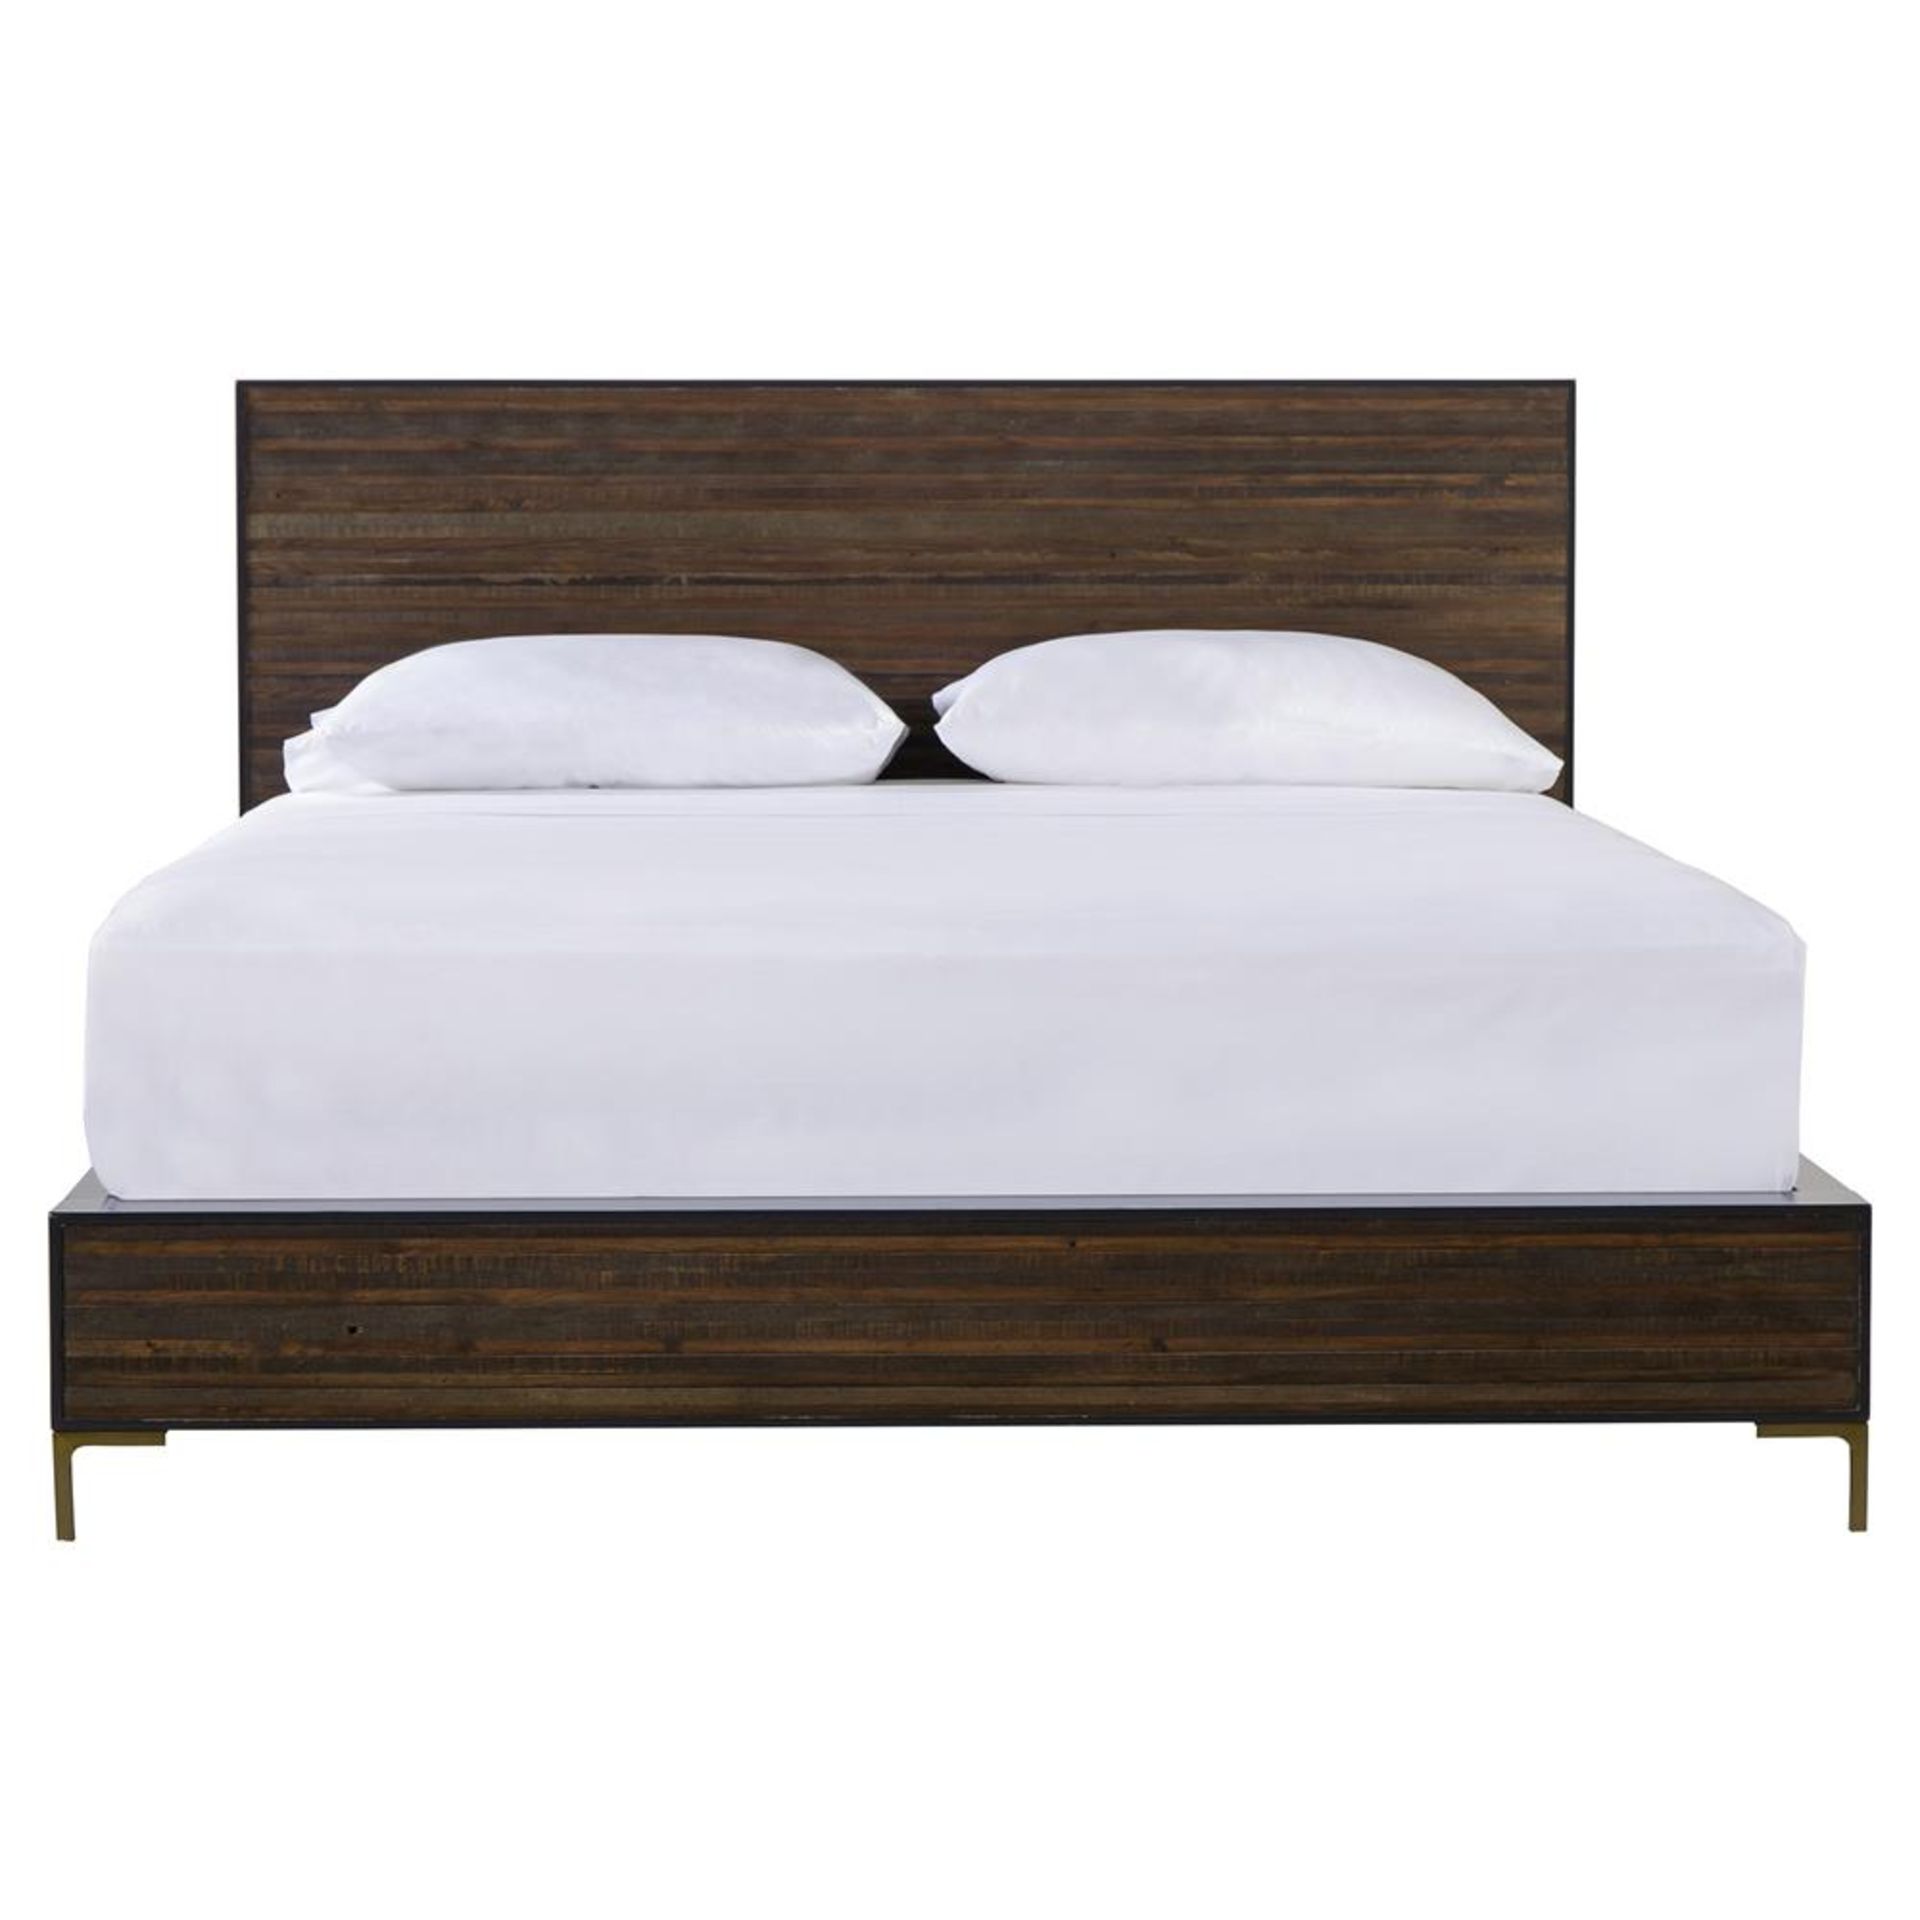 Thomas Bina Zuma Bed US King ( Mattress Not Supplied) This Industrial Style Bed Features A - Image 2 of 2